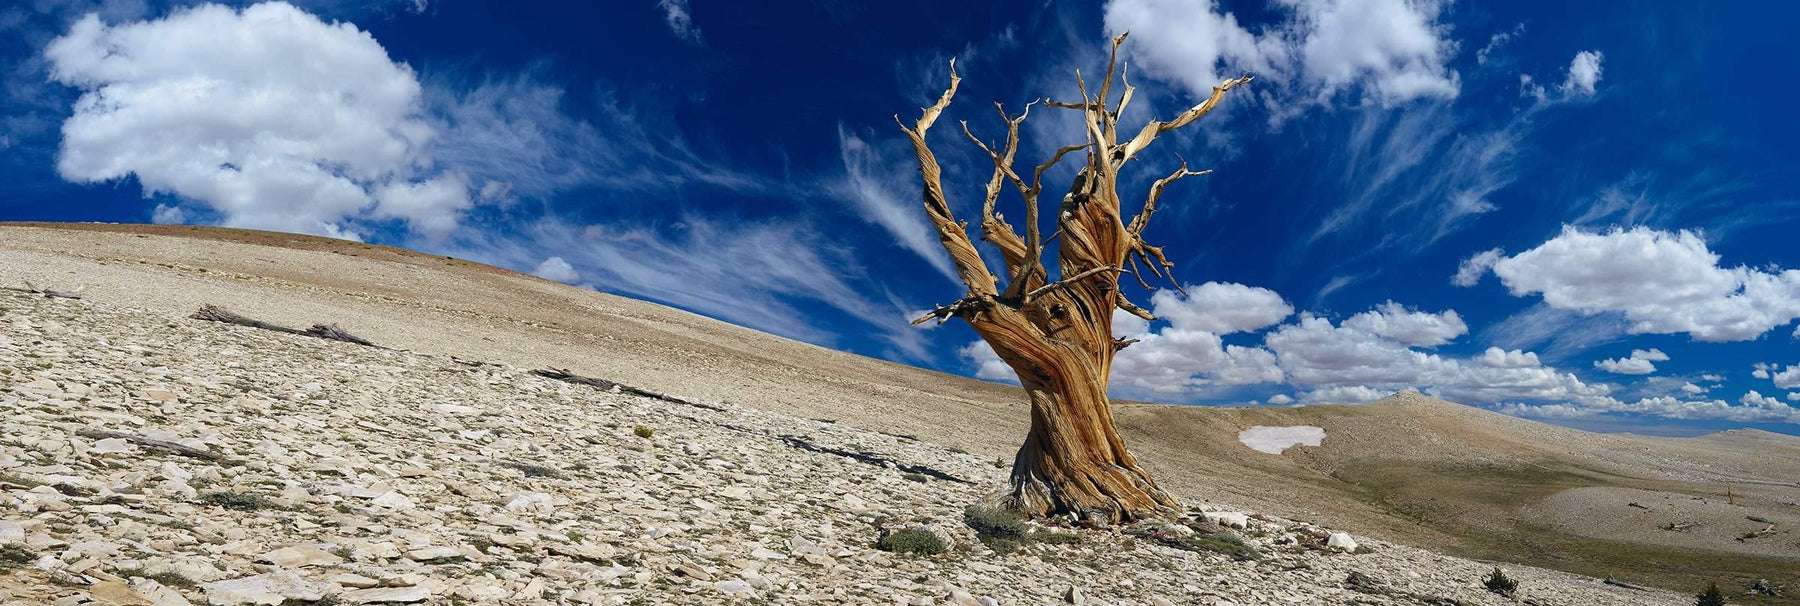 Old leafless bristlecone tree on a rocky hillside beneath blue cloudy skies in White Mountains California